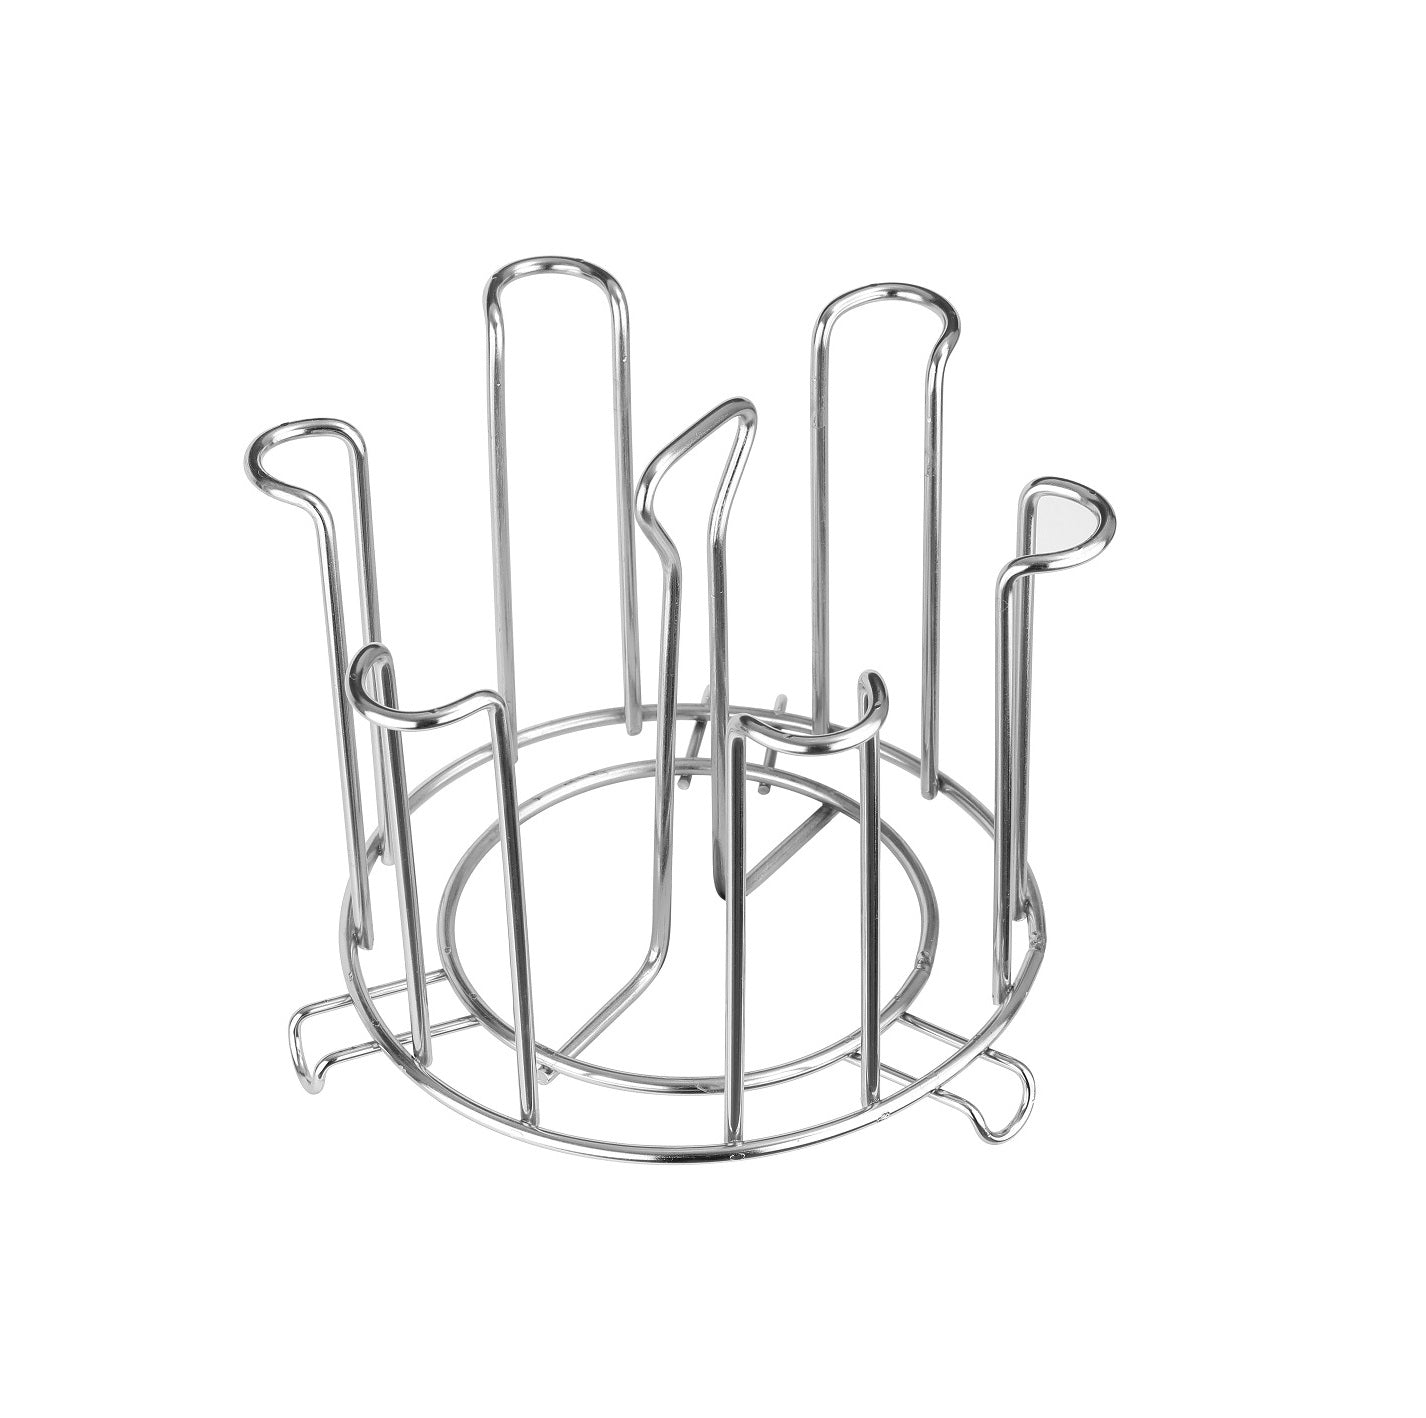 2741 SS Round Glass Stand used for holding sensitive glasses and all present in all kinds of kitchens of official and household places etc. 